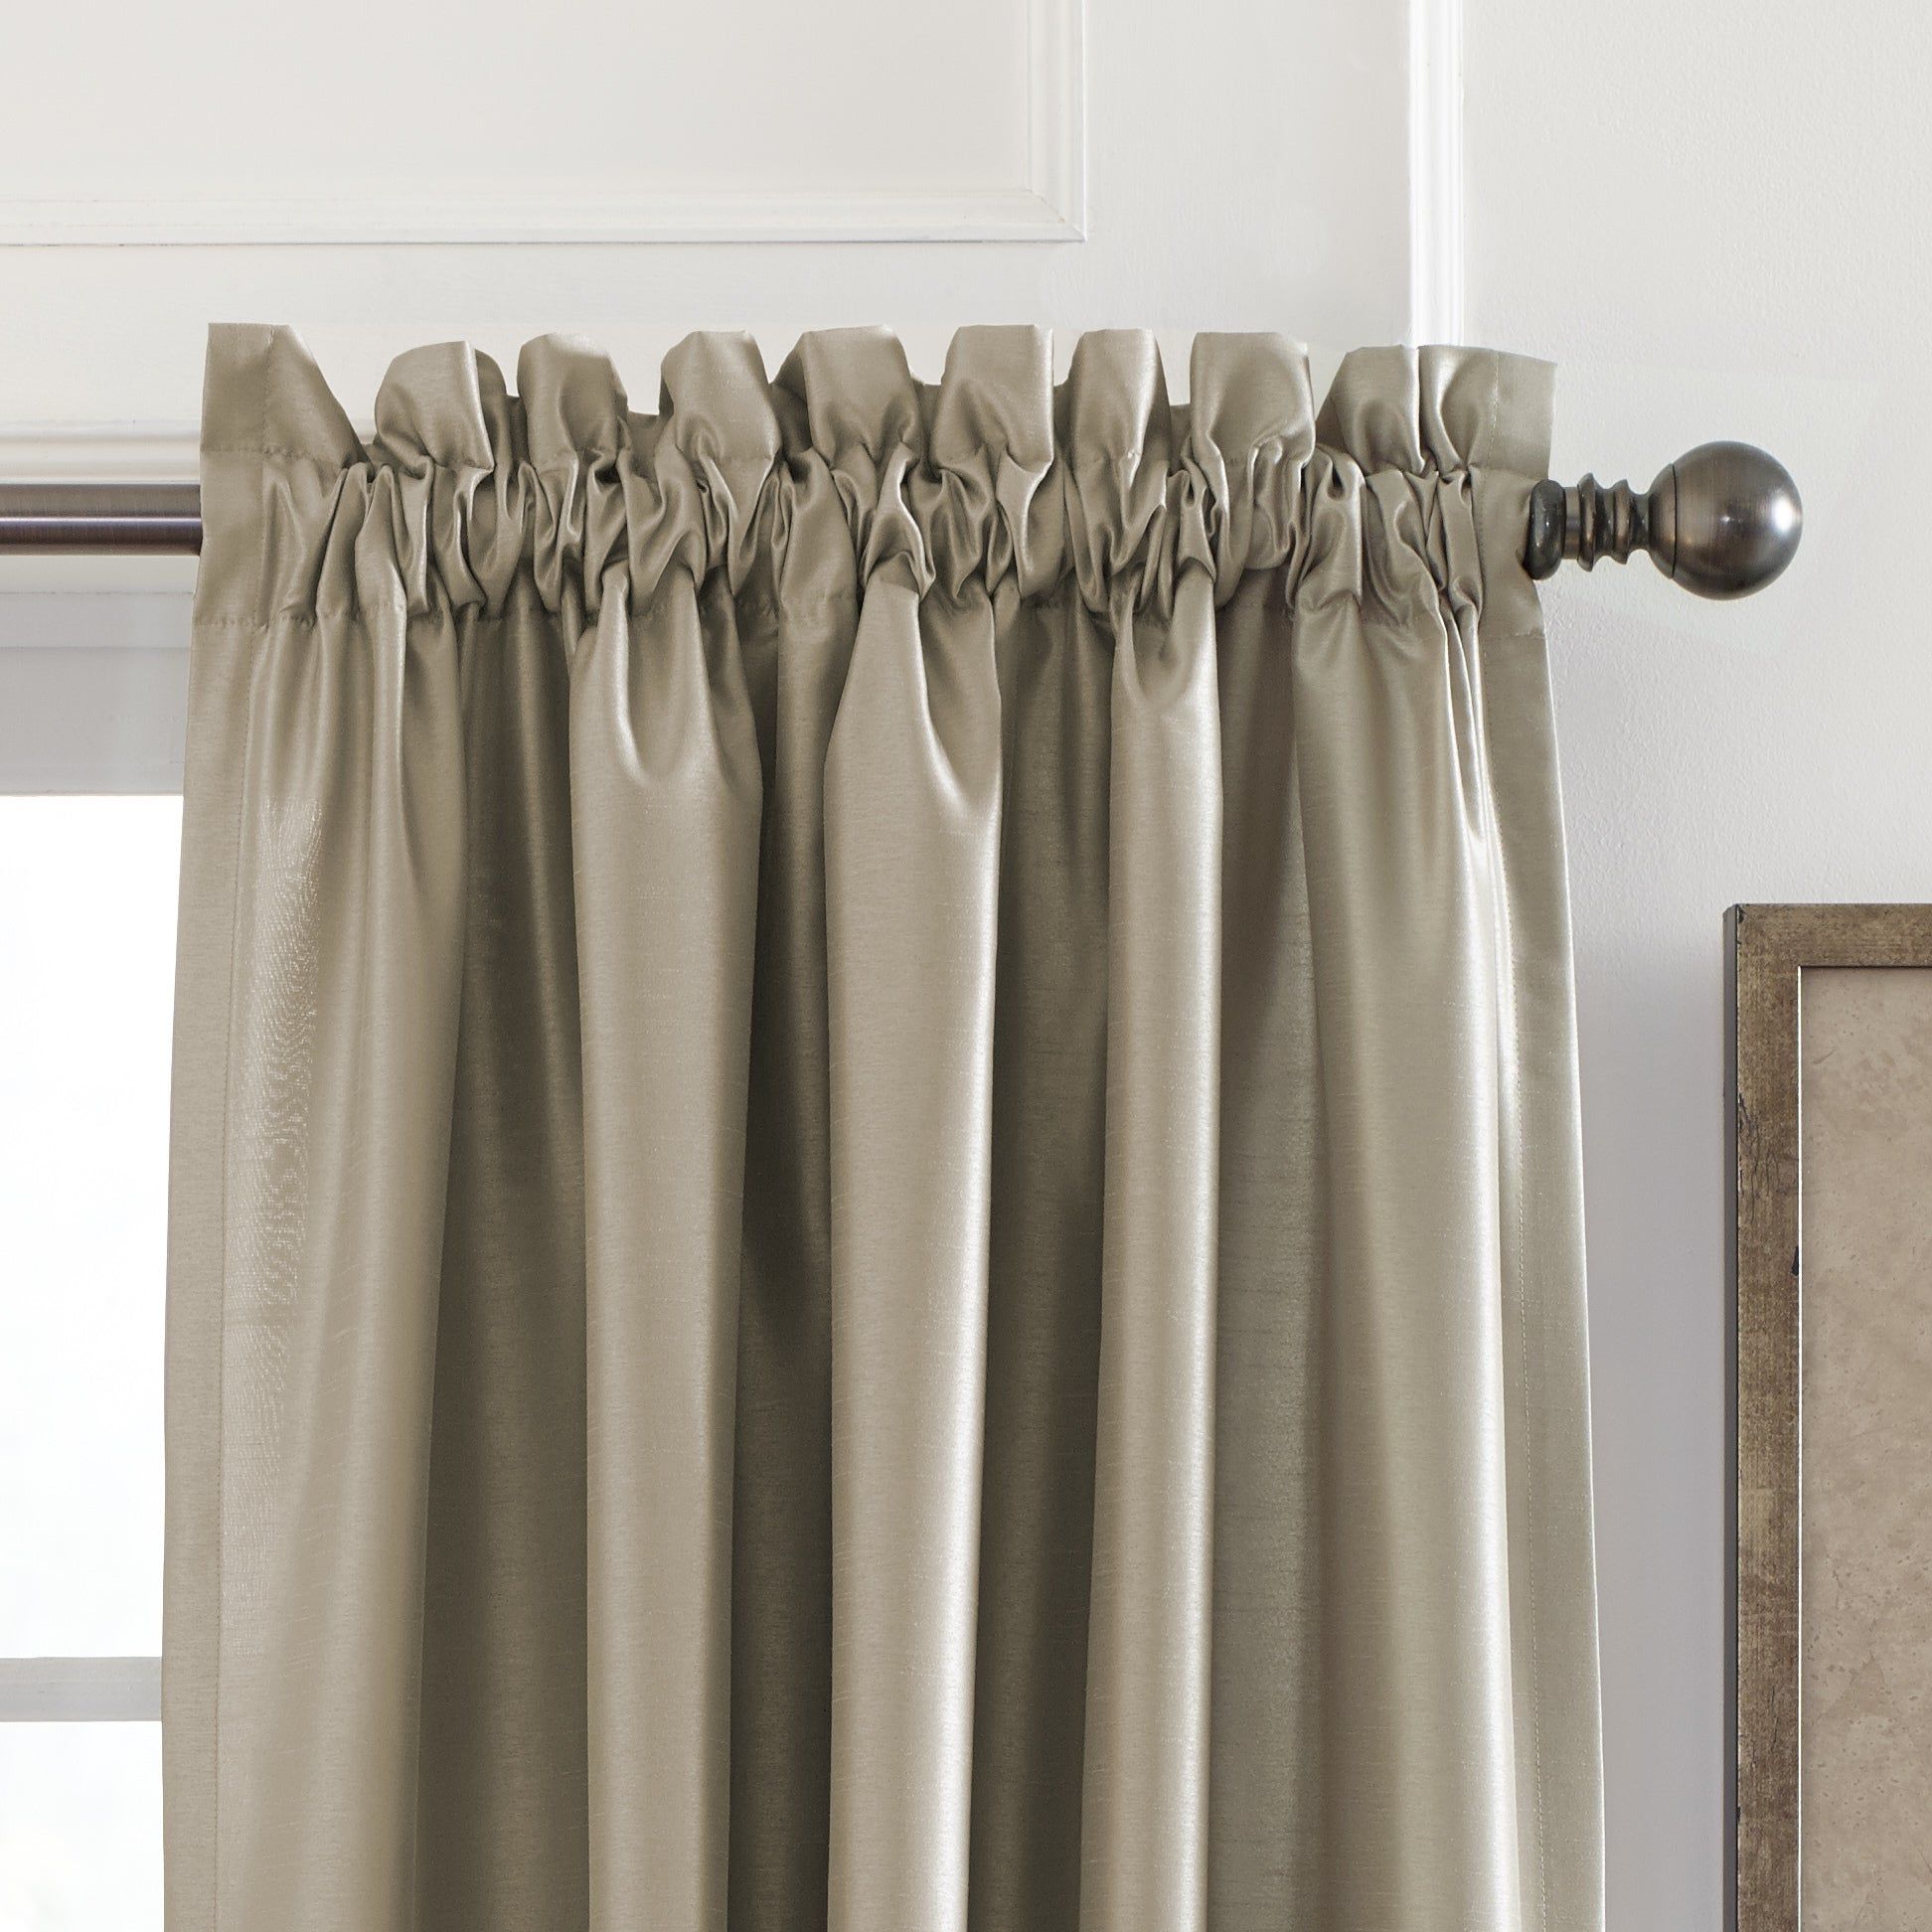 Perry Ellis Faux Silk Blackout Curtain Panel Pair Regarding Overseas Faux Silk Blackout Curtain Panel Pairs (View 18 of 20)